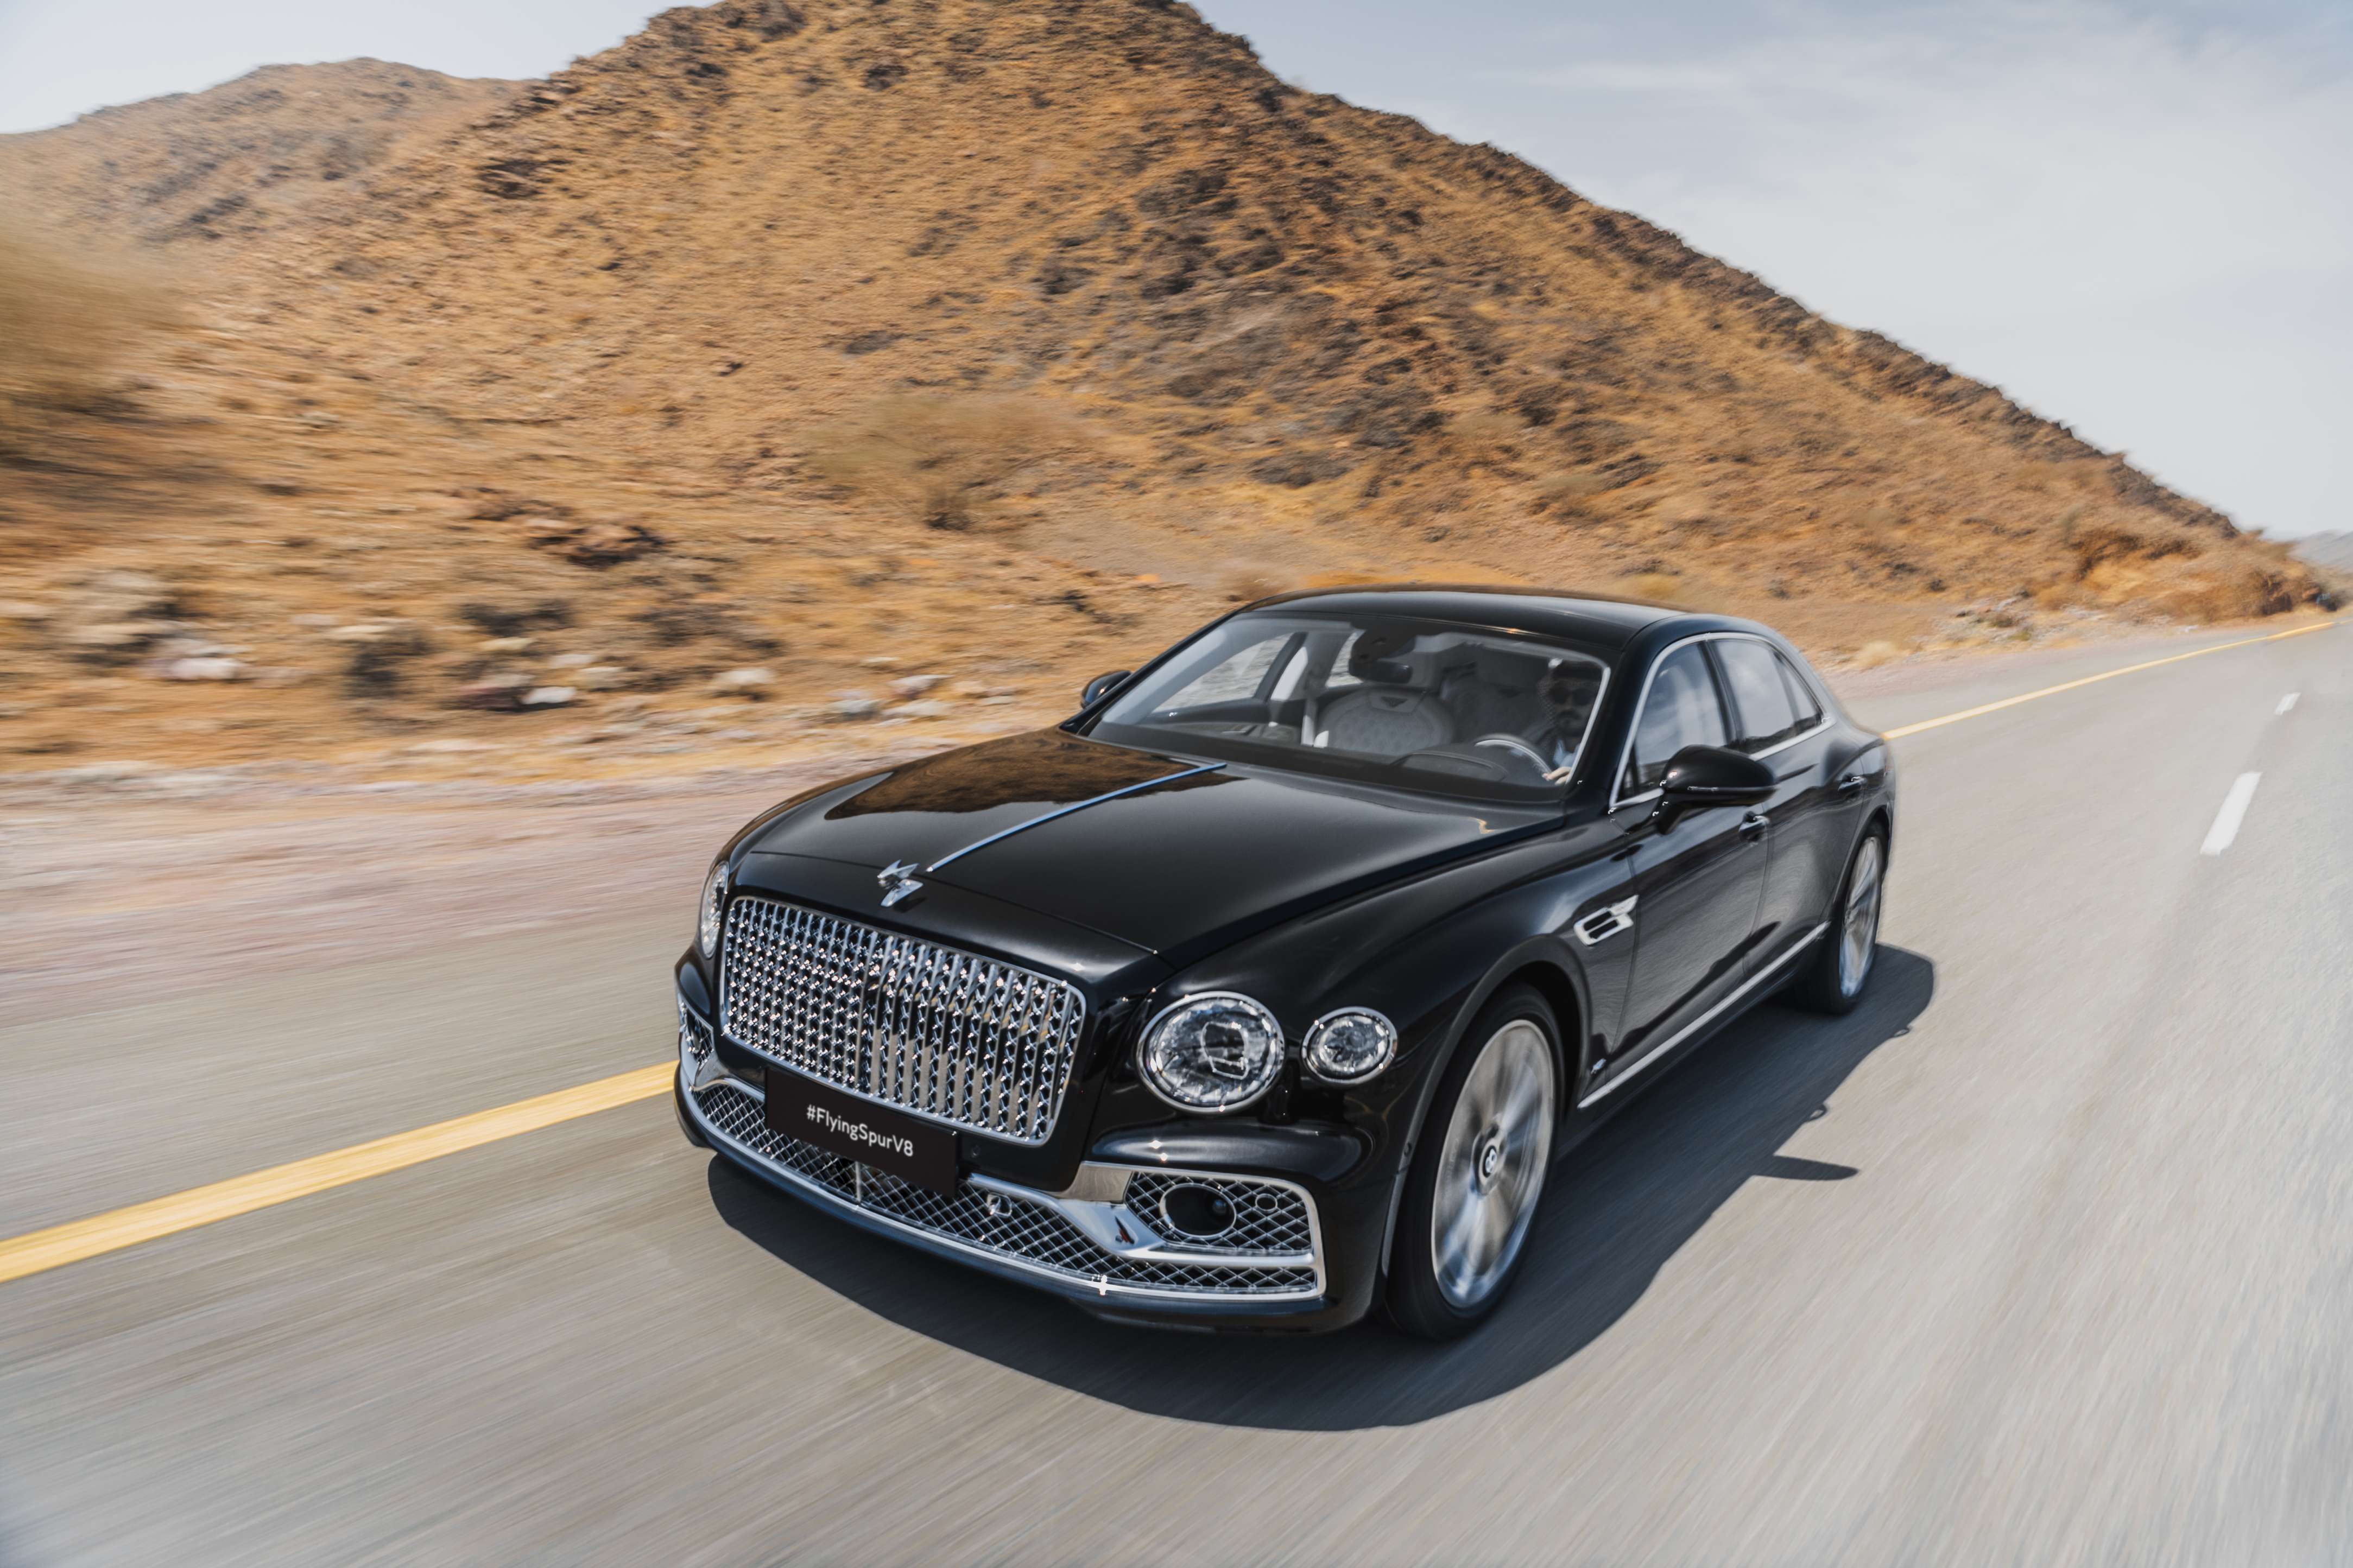 Flying spur ready to soar with v8 power across the middle east